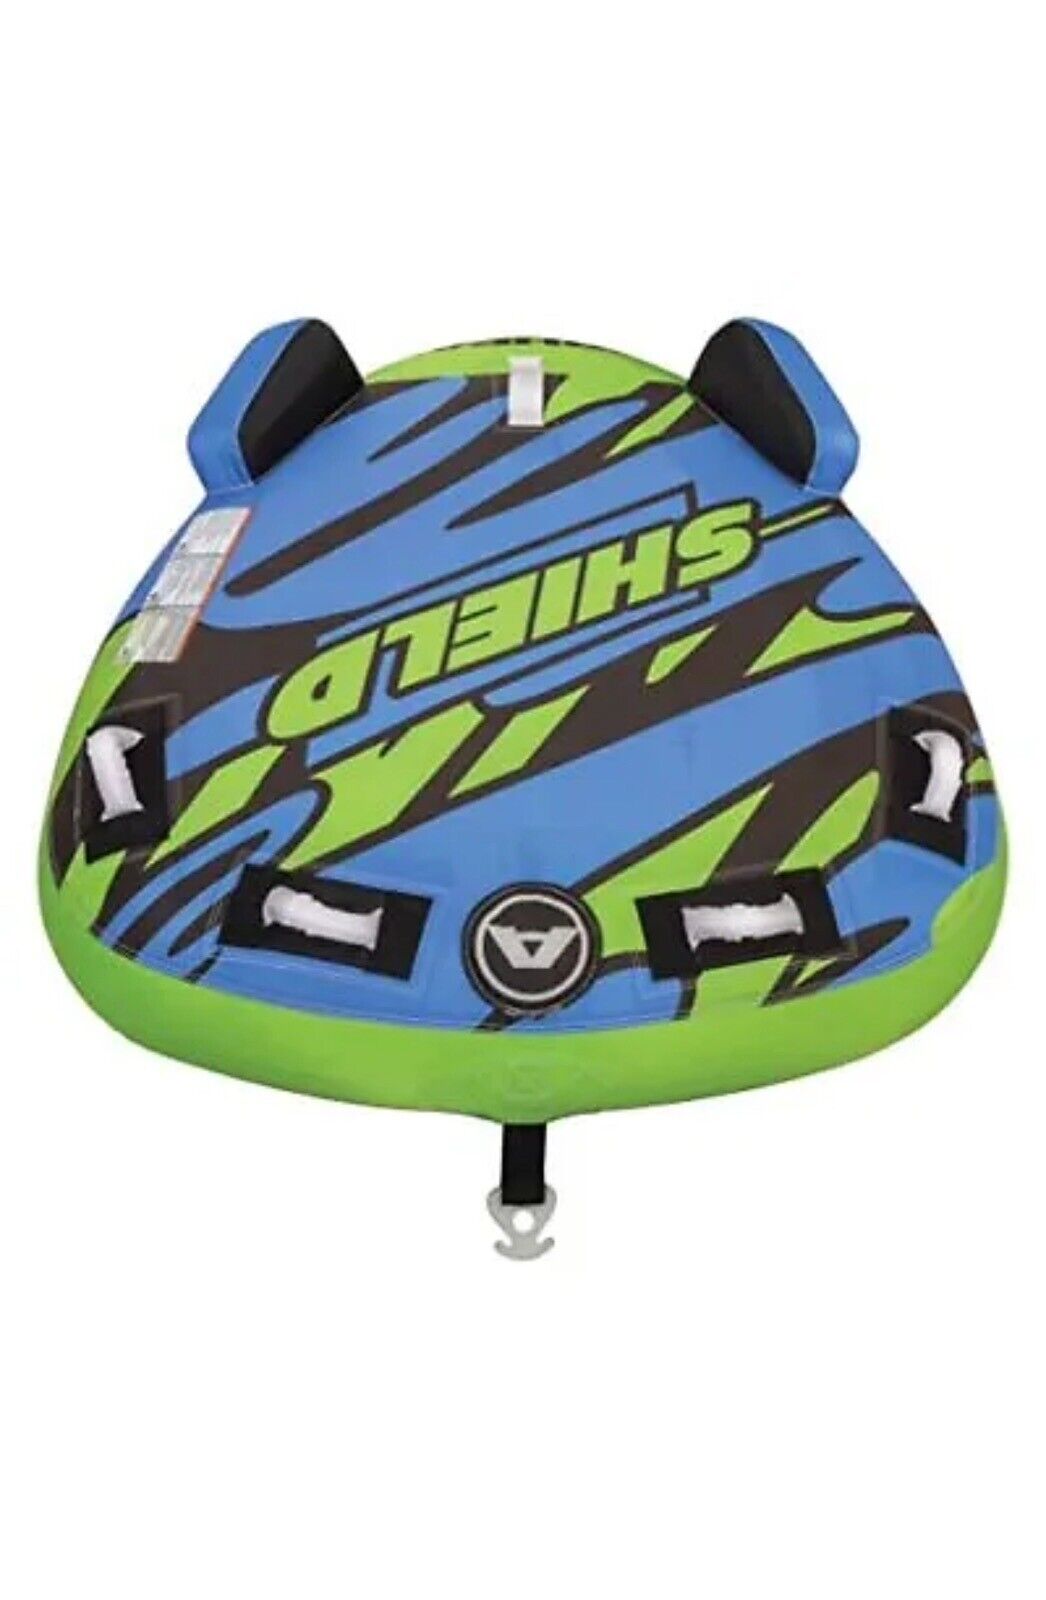 AIRHEAD Unisex Adult Shield Boat Towable Tow Raft Blue Green Large 56” X 48”